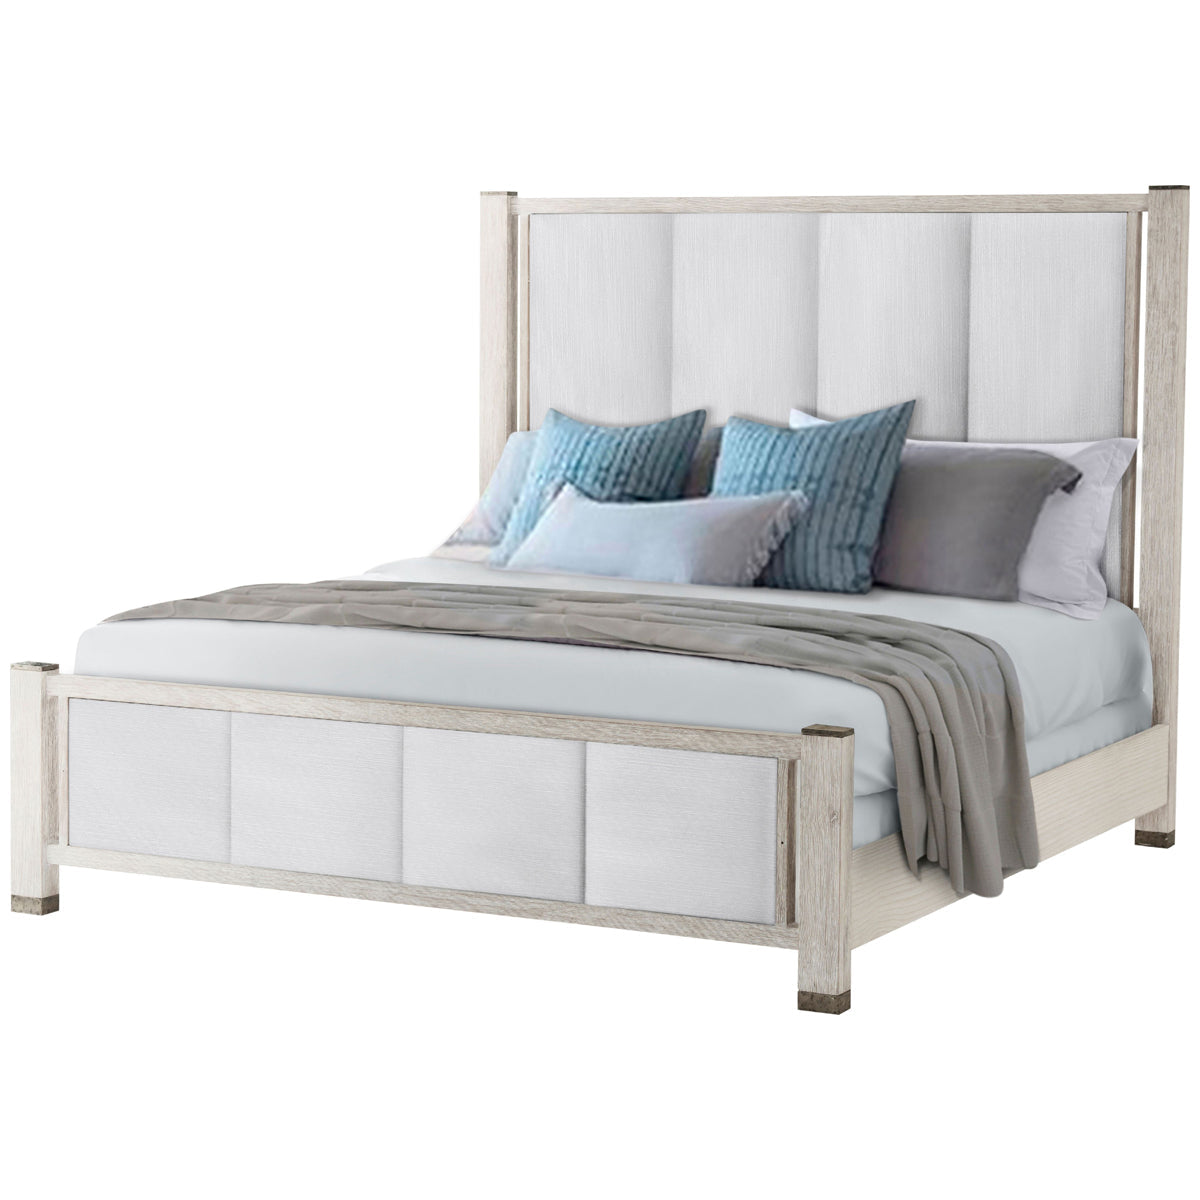 Theodore Alexander Breeze Upholstered US Bed